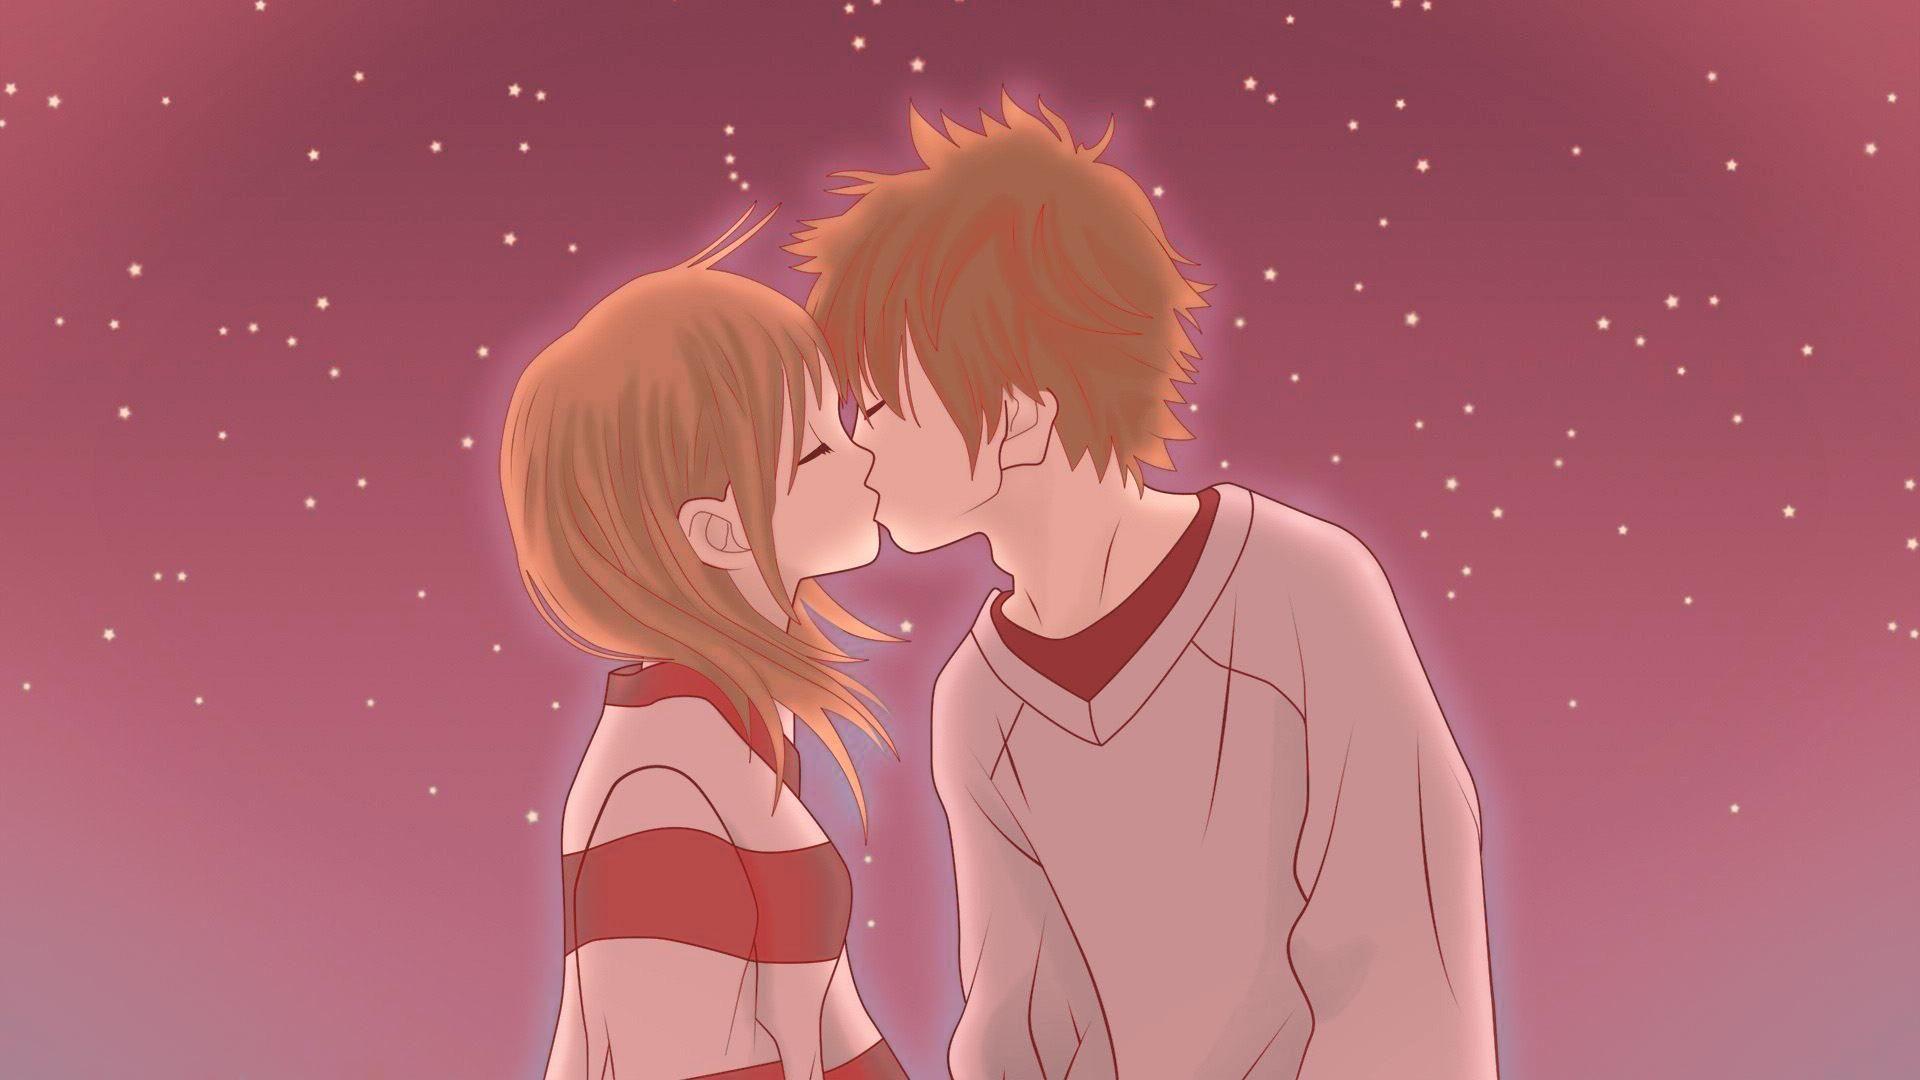 Anime couples and kisses